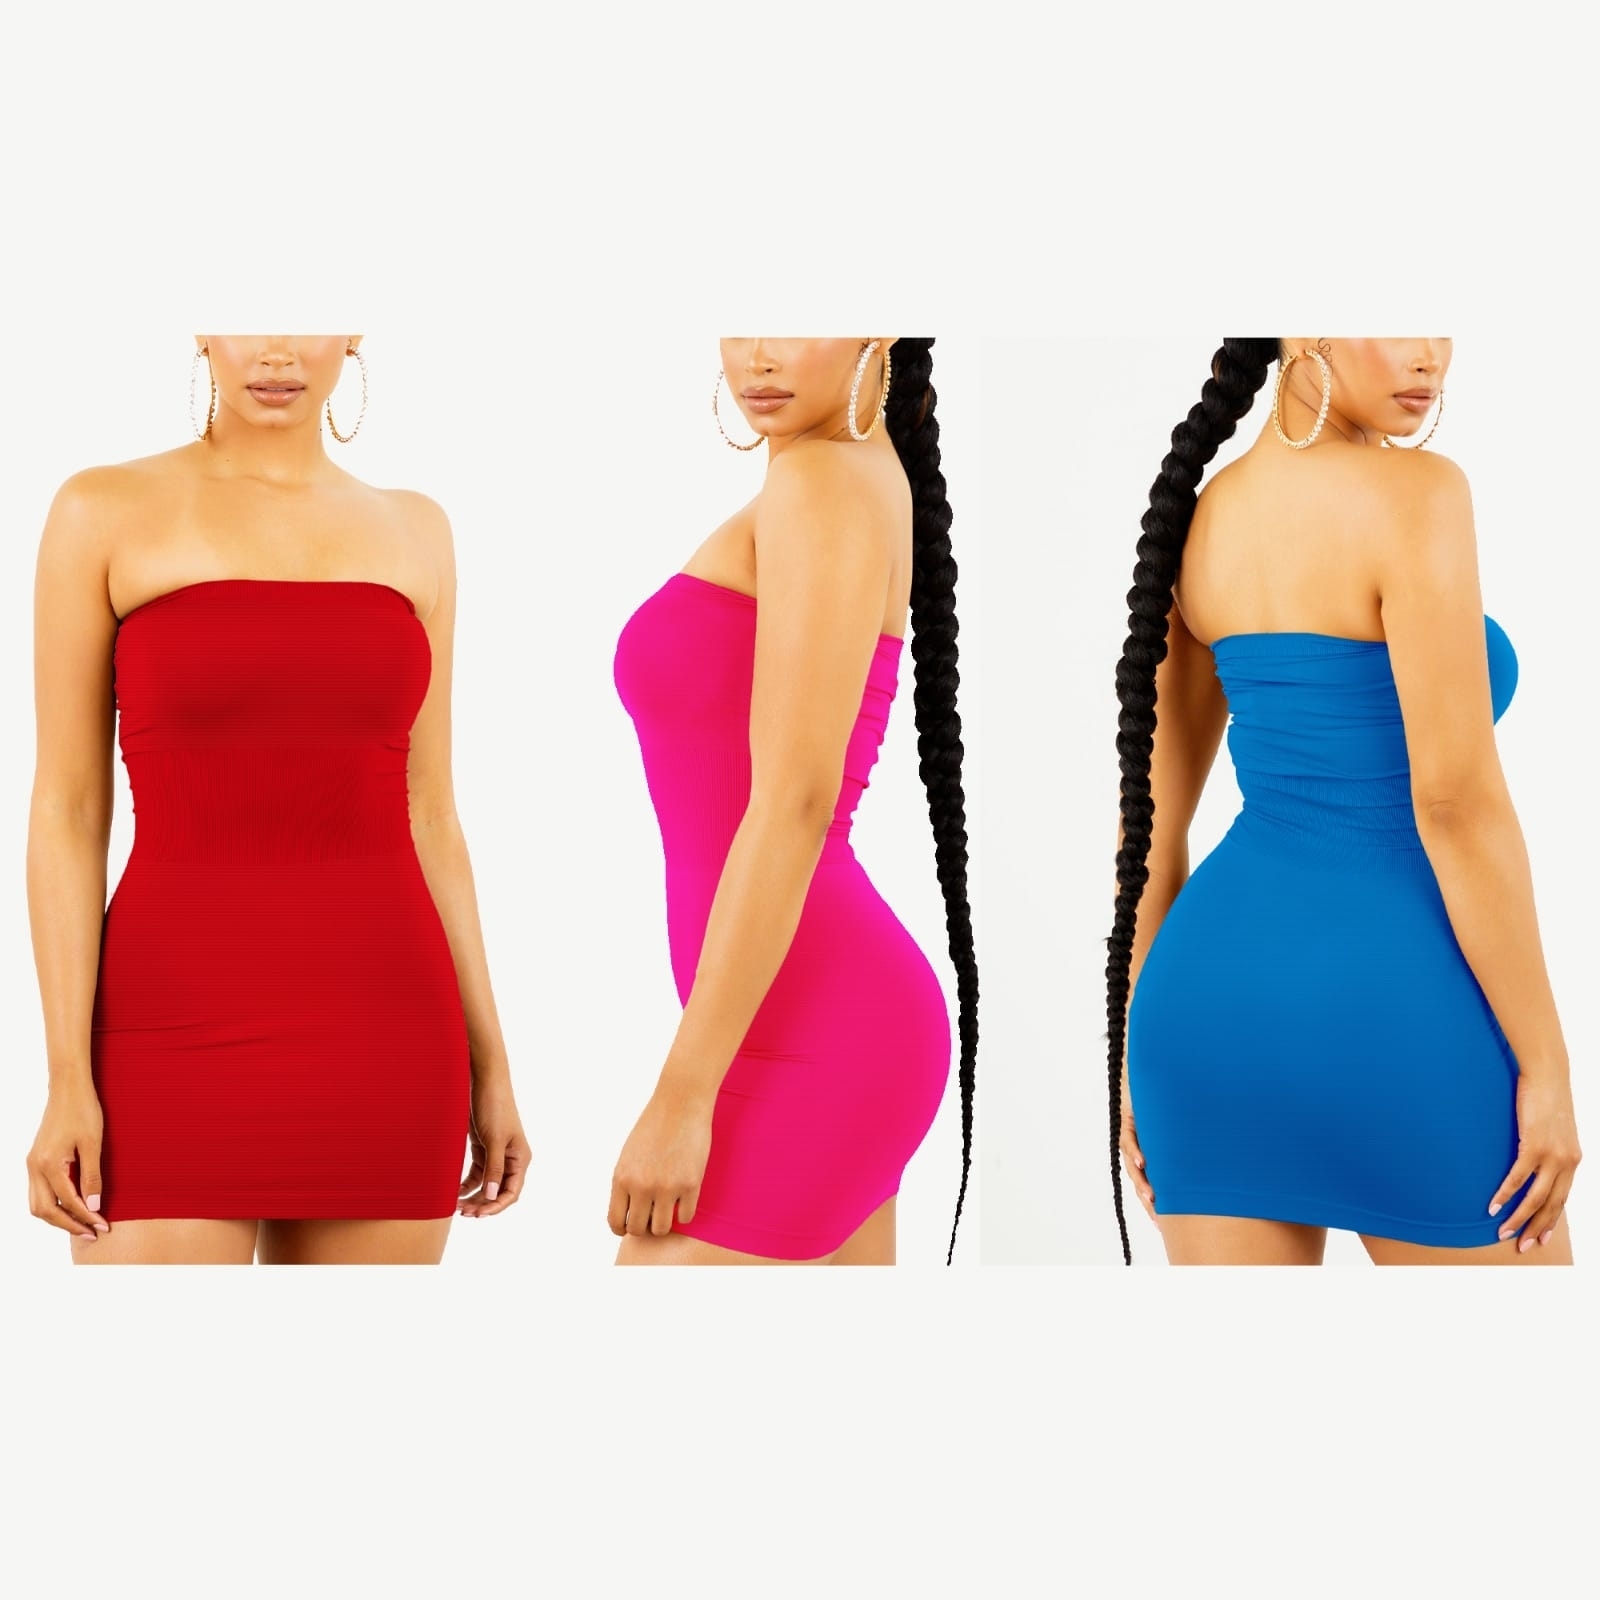 2-Pack Women's Strapless Stretchy Tight Fit Seamless Body Con Mini Tube Top Dress - PINK, S